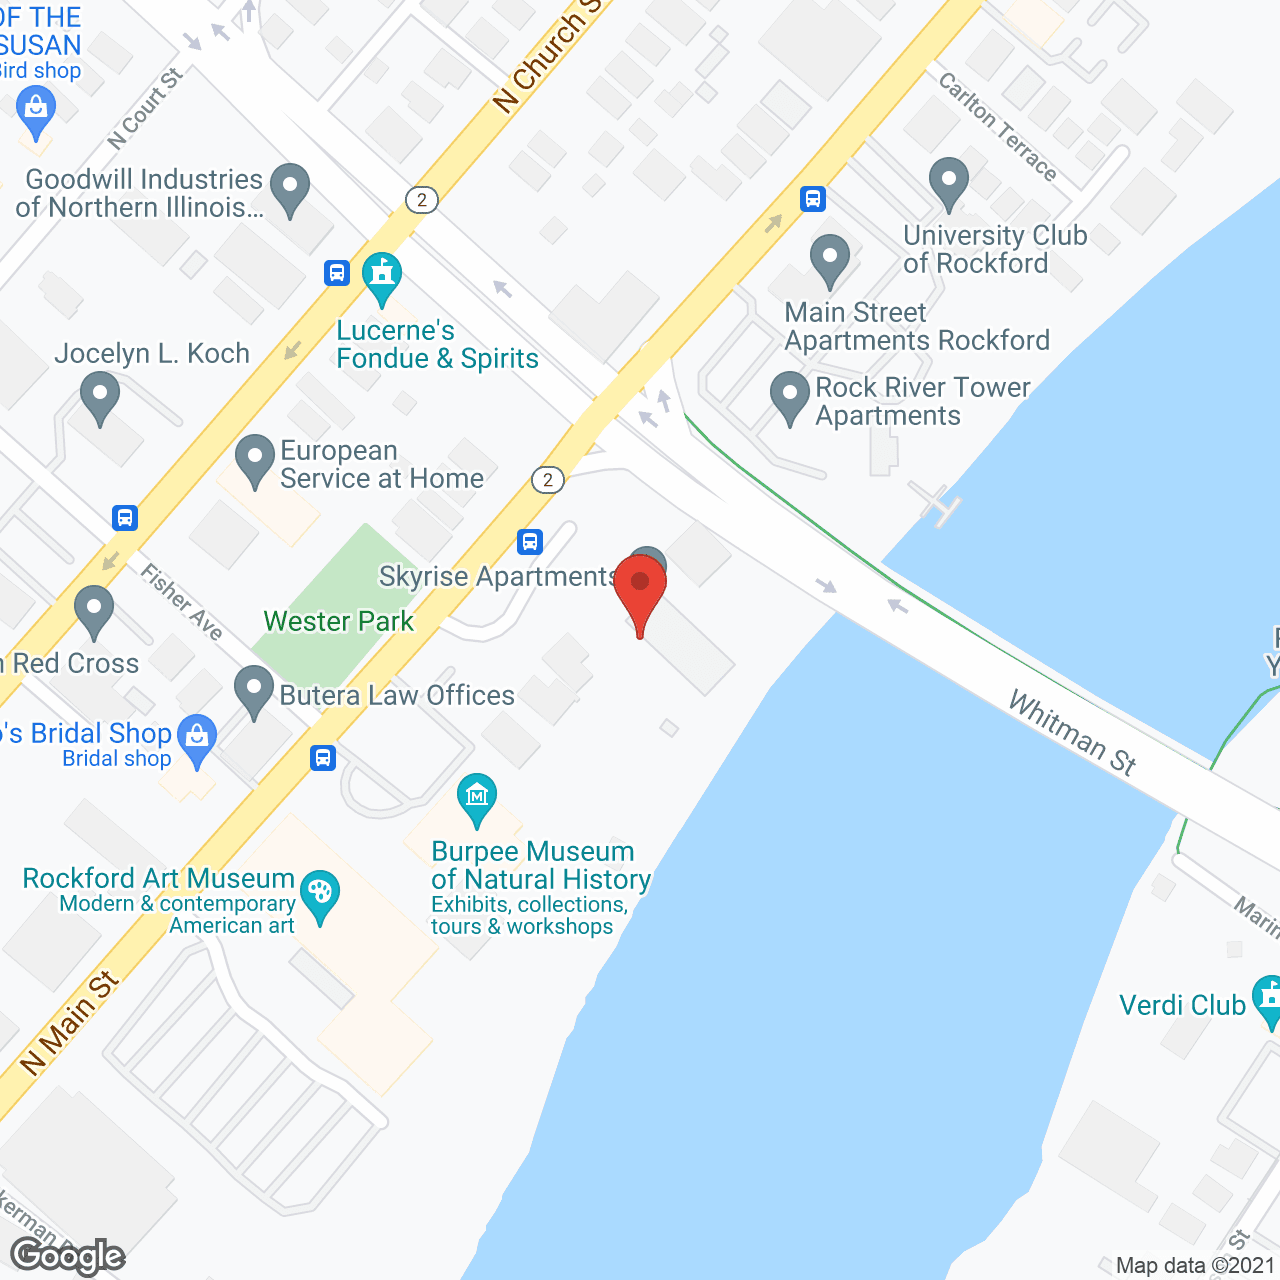 Skyrise Apartments in google map